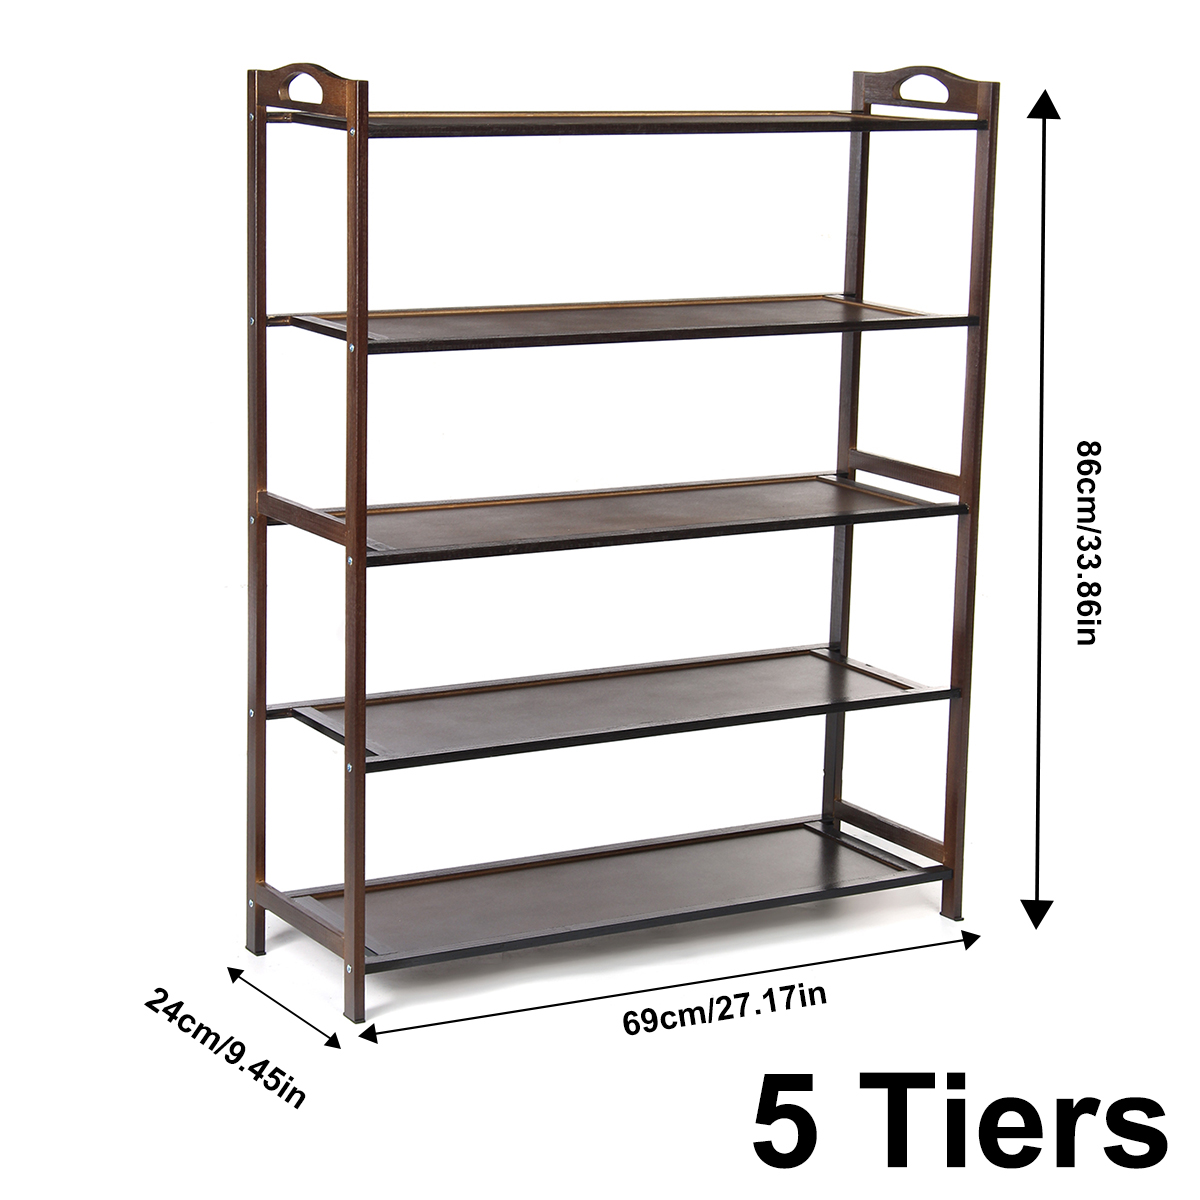 3456-Tiers-Shoe-Rack-Multi-layers-Storage-Shelf-Space-Saving-Organizer-Books-Decorations-Stand-for-H-1800948-6